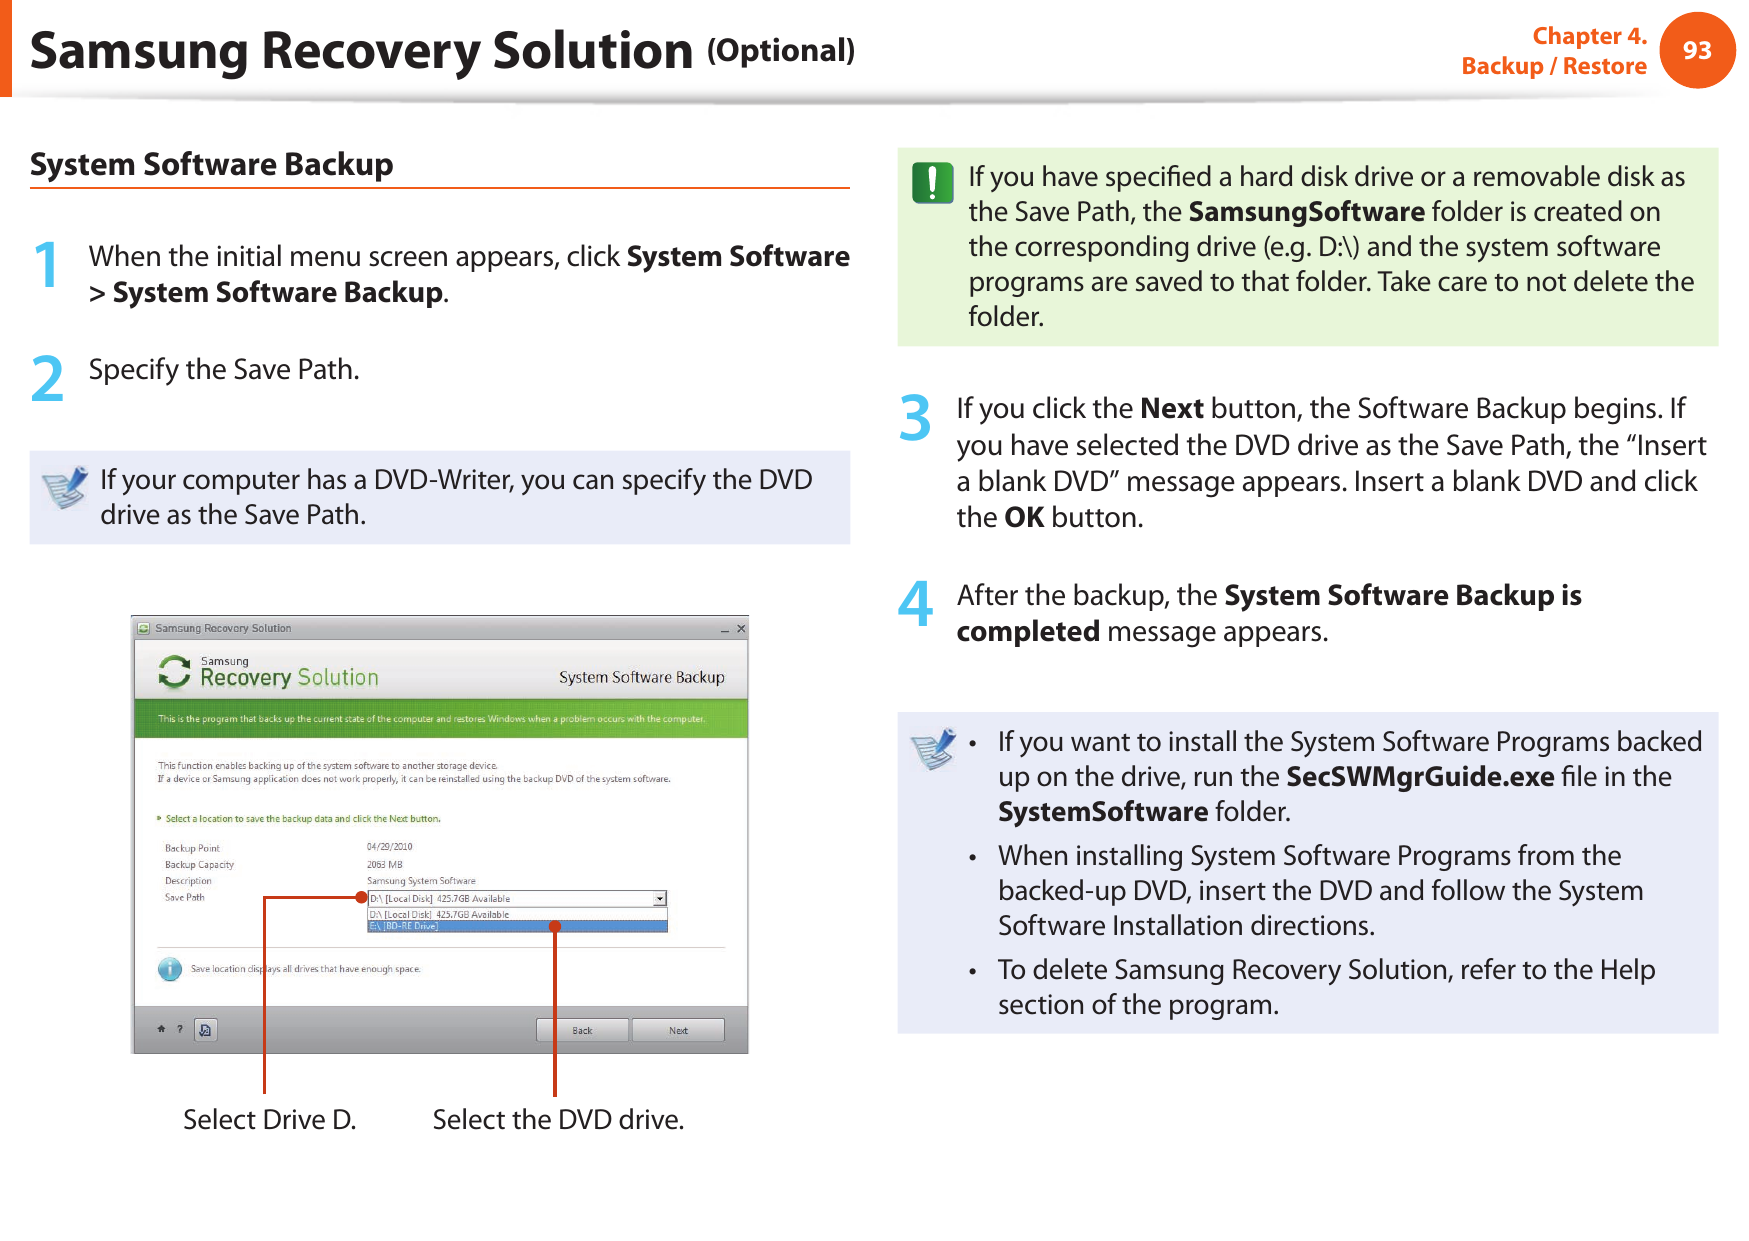 9293Chapter 4.  Backup / RestoreSamsung Recovery Solution (Optional)System Software Backup1  When the initial menu screen appears, click System Software &gt; System Software Backup.2  Specify the Save Path. If your computer has a DVD-Writer, you can specify the DVD drive as the Save Path.Select Drive D. Select the DVD drive.If you have speci ed a hard disk drive or a removable disk as the Save Path, the SamsungSoftware folder is created on the corresponding drive (e.g. D:\) and the system software programs are saved to that folder. Take care to not delete the folder. 3  If you click the Next button, the Software Backup begins. If you have selected the DVD drive as the Save Path, the “Insert a blank DVD” message appears. Insert a blank DVD and click the OK button.4  After the backup, the System Software Backup is completed message appears.If you want to install the System Software Programs backed • up on the drive, run the SecSWMgrGuide.exe  le in the SystemSoftware folder.When installing System Software Programs from the • backed-up DVD, insert the DVD and follow the System Software Installation directions.To delete Samsung Recovery Solution, refer to the Help • section of the program.